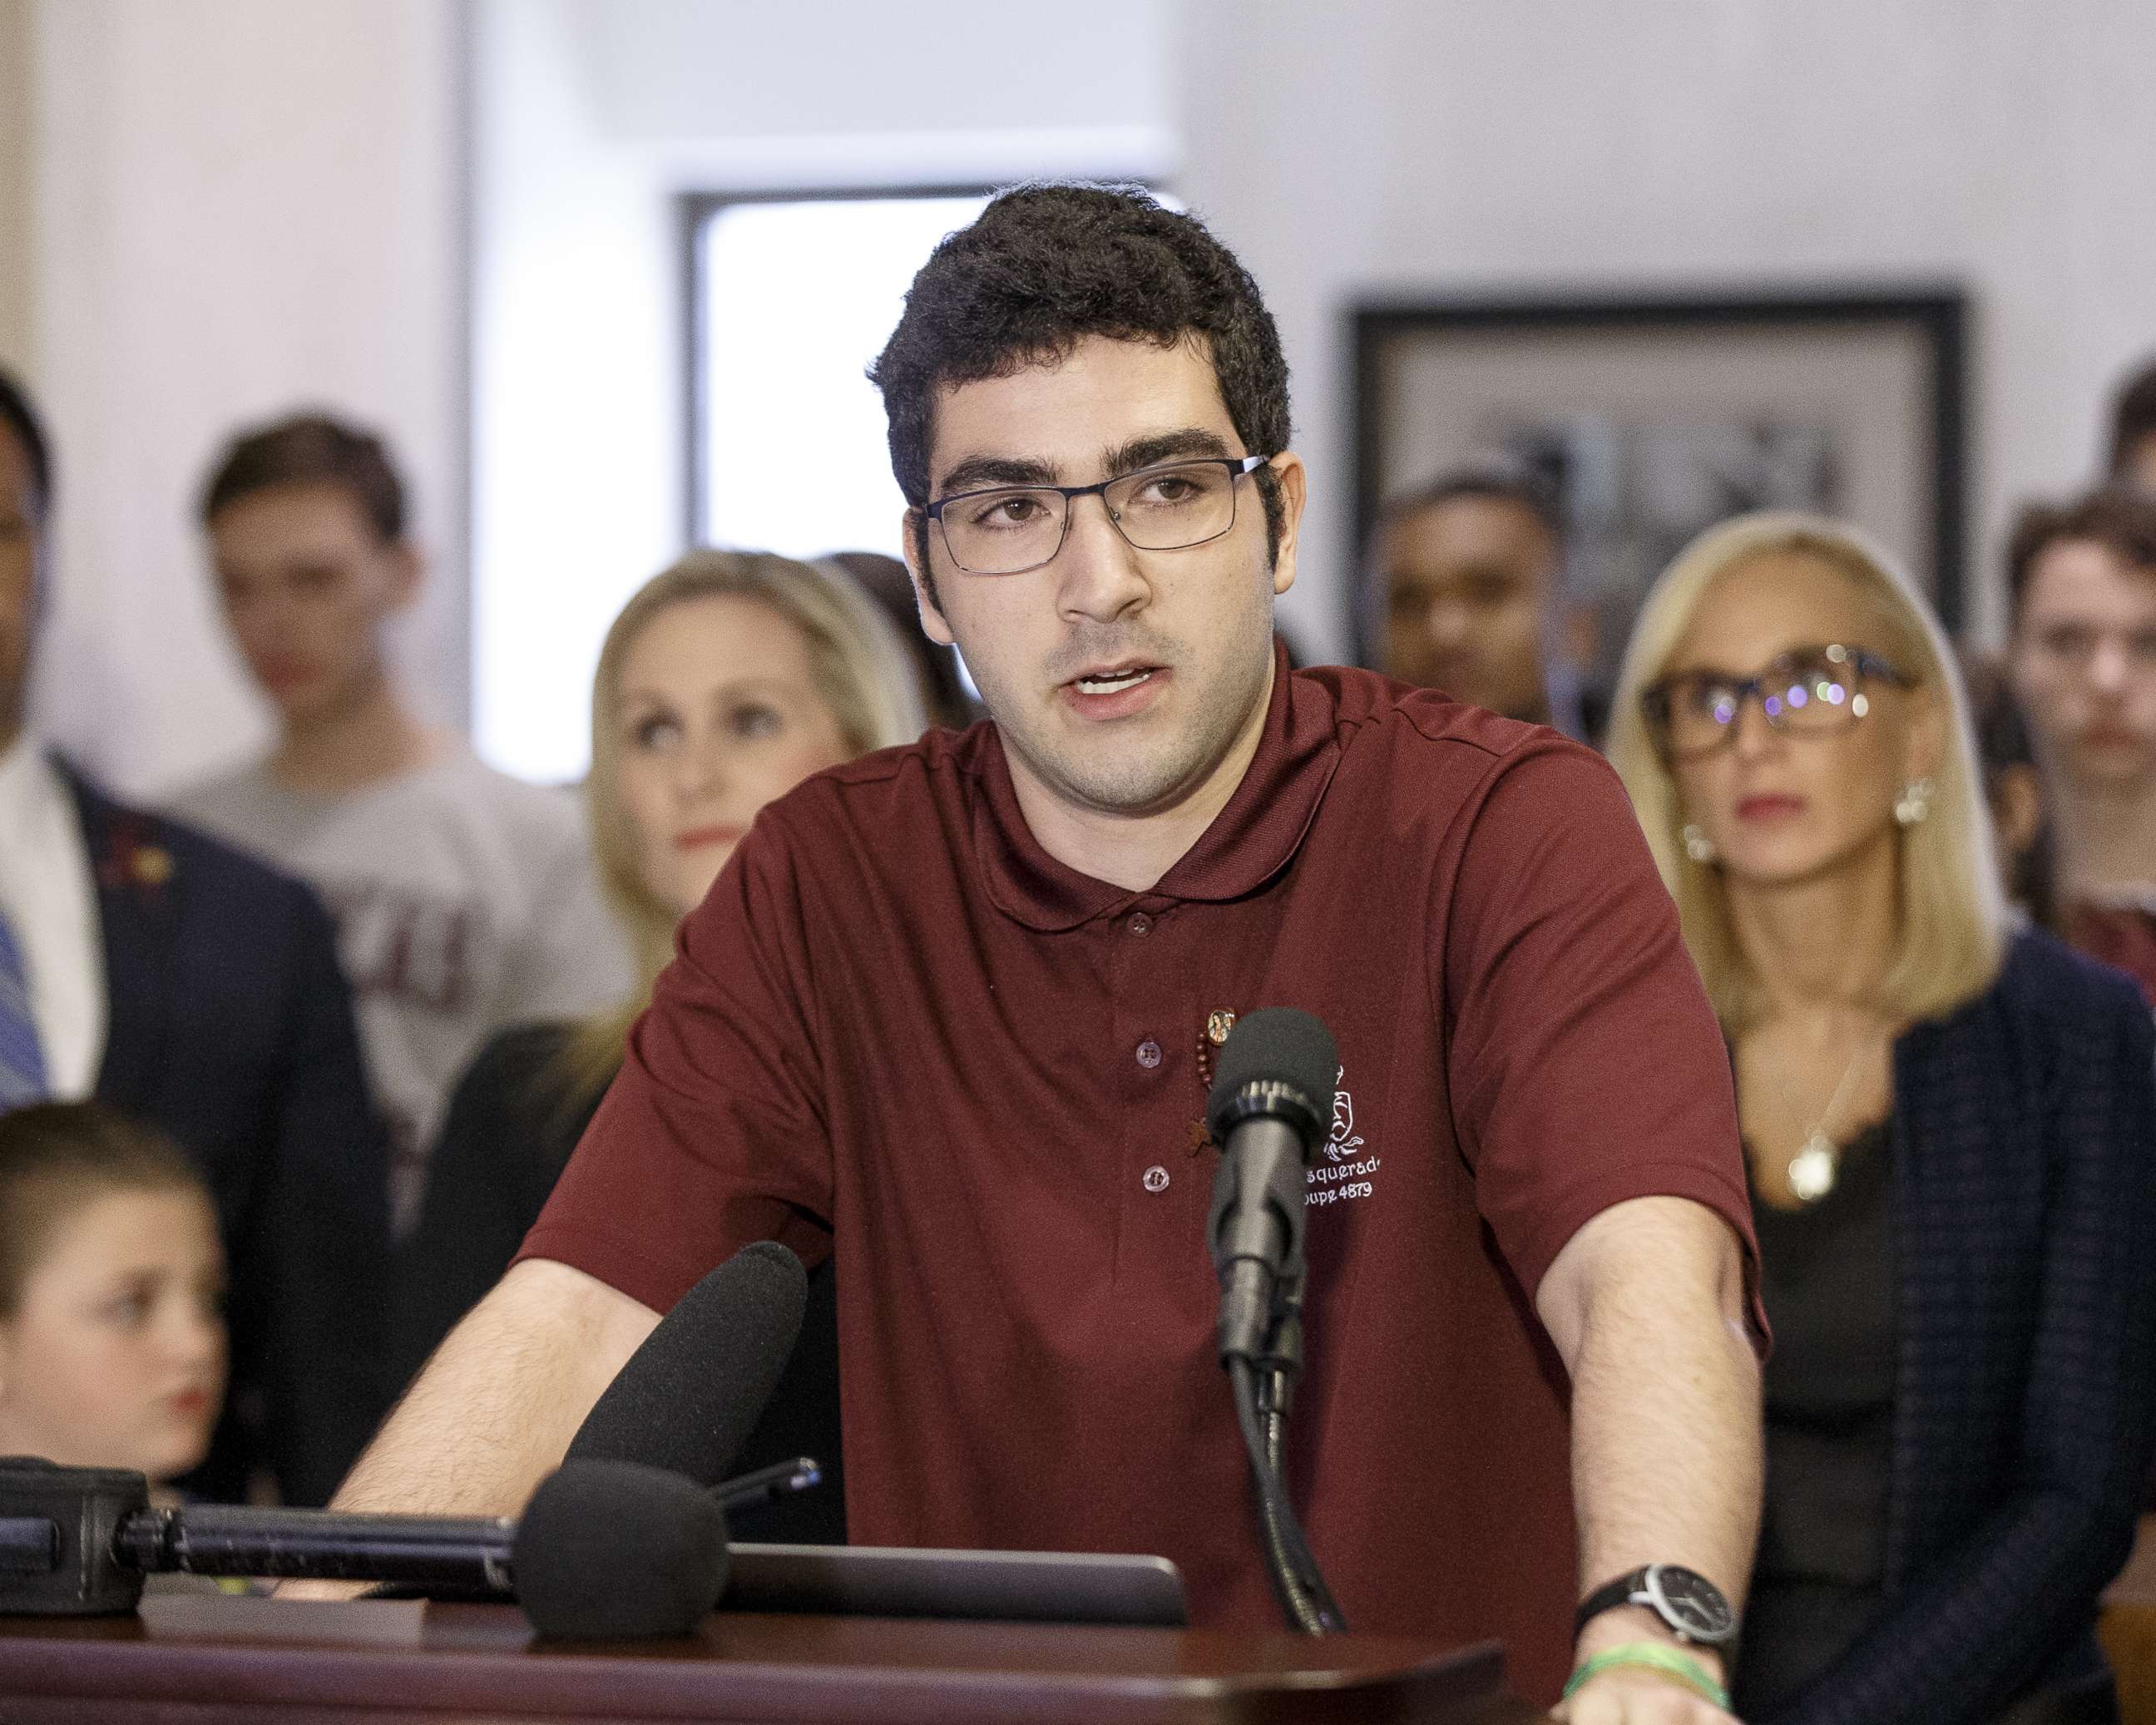 PHOTO: Lorenzo Prado, a student from Marjory Stoneman Douglas High School speaks at the Florida State Capitol building, Feb. 21, 2018, in Tallahassee, Fla. 